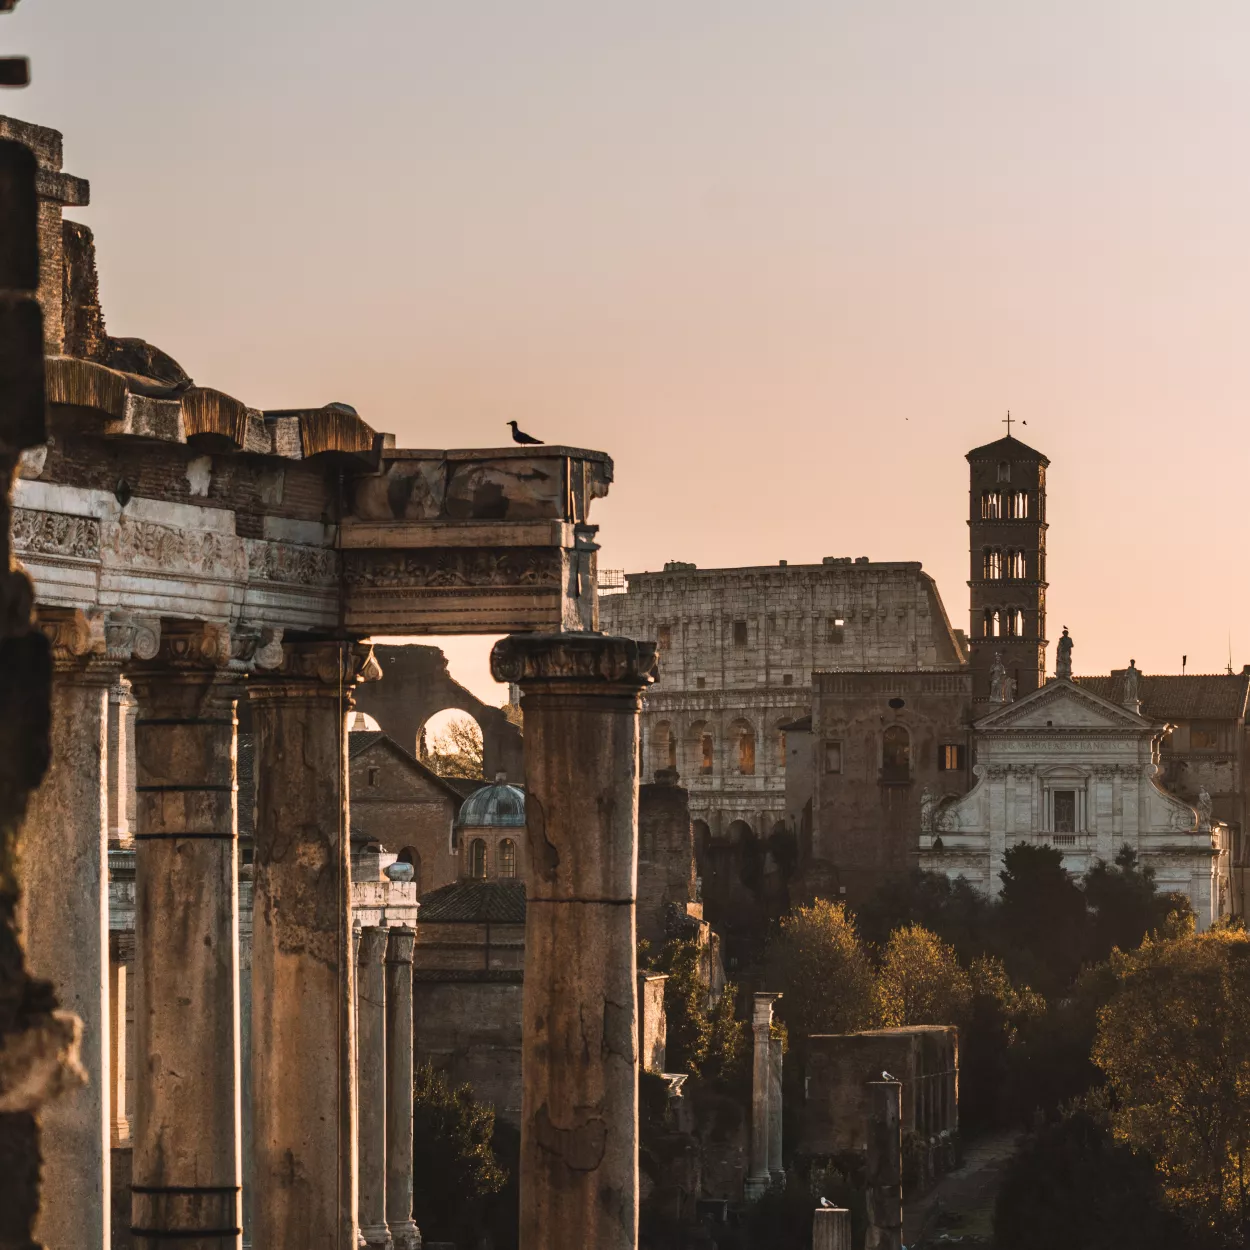 Evening shot of the Forum in Rome